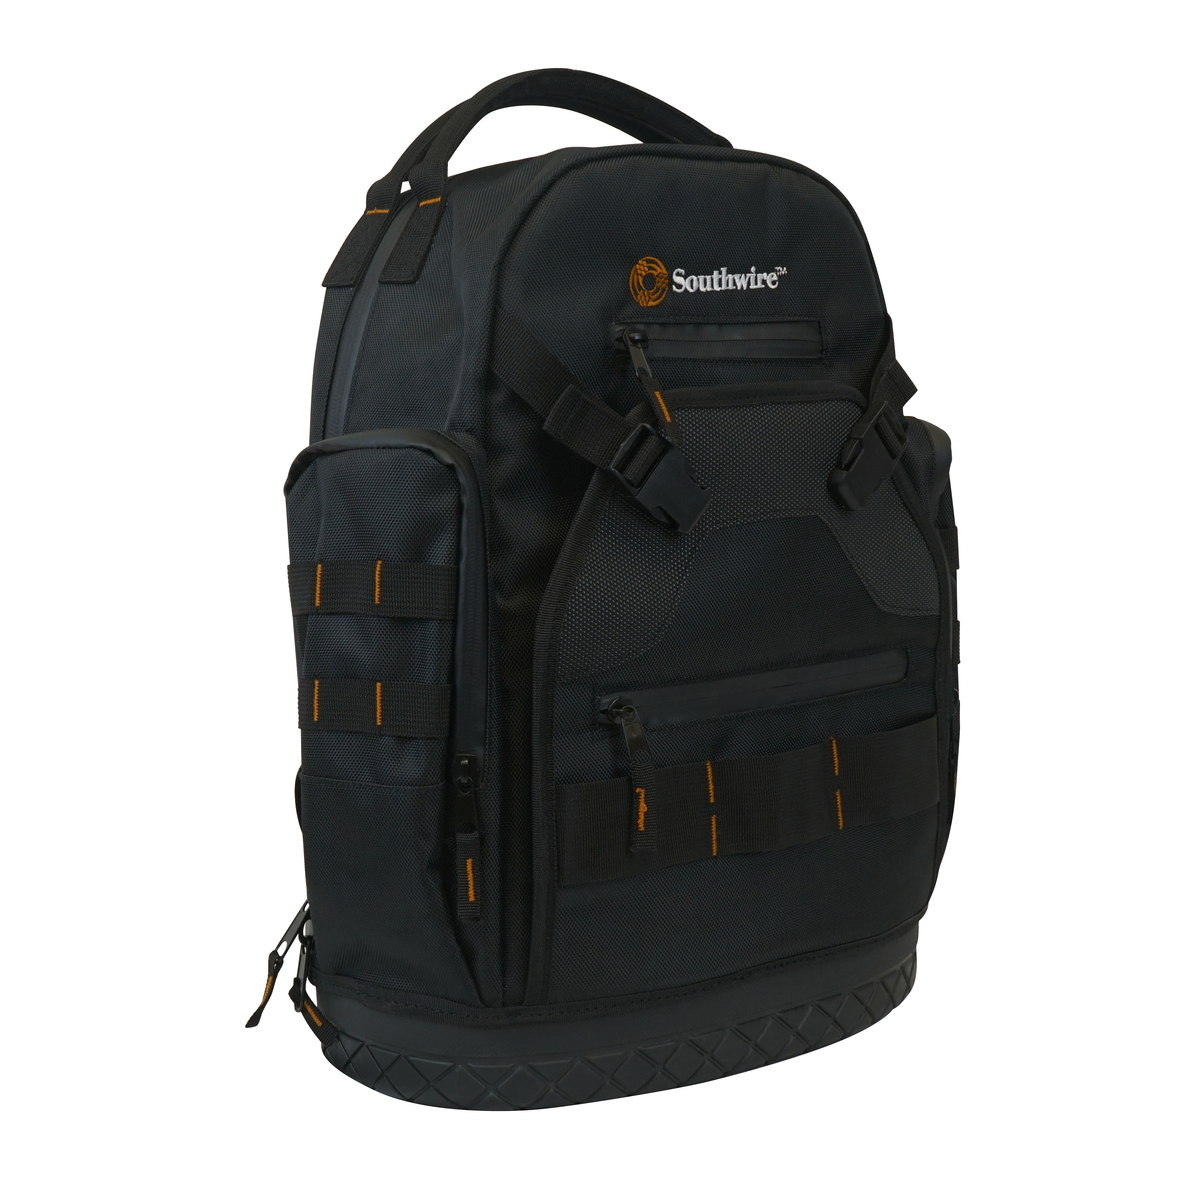 PROBAGBP Tool Backpack